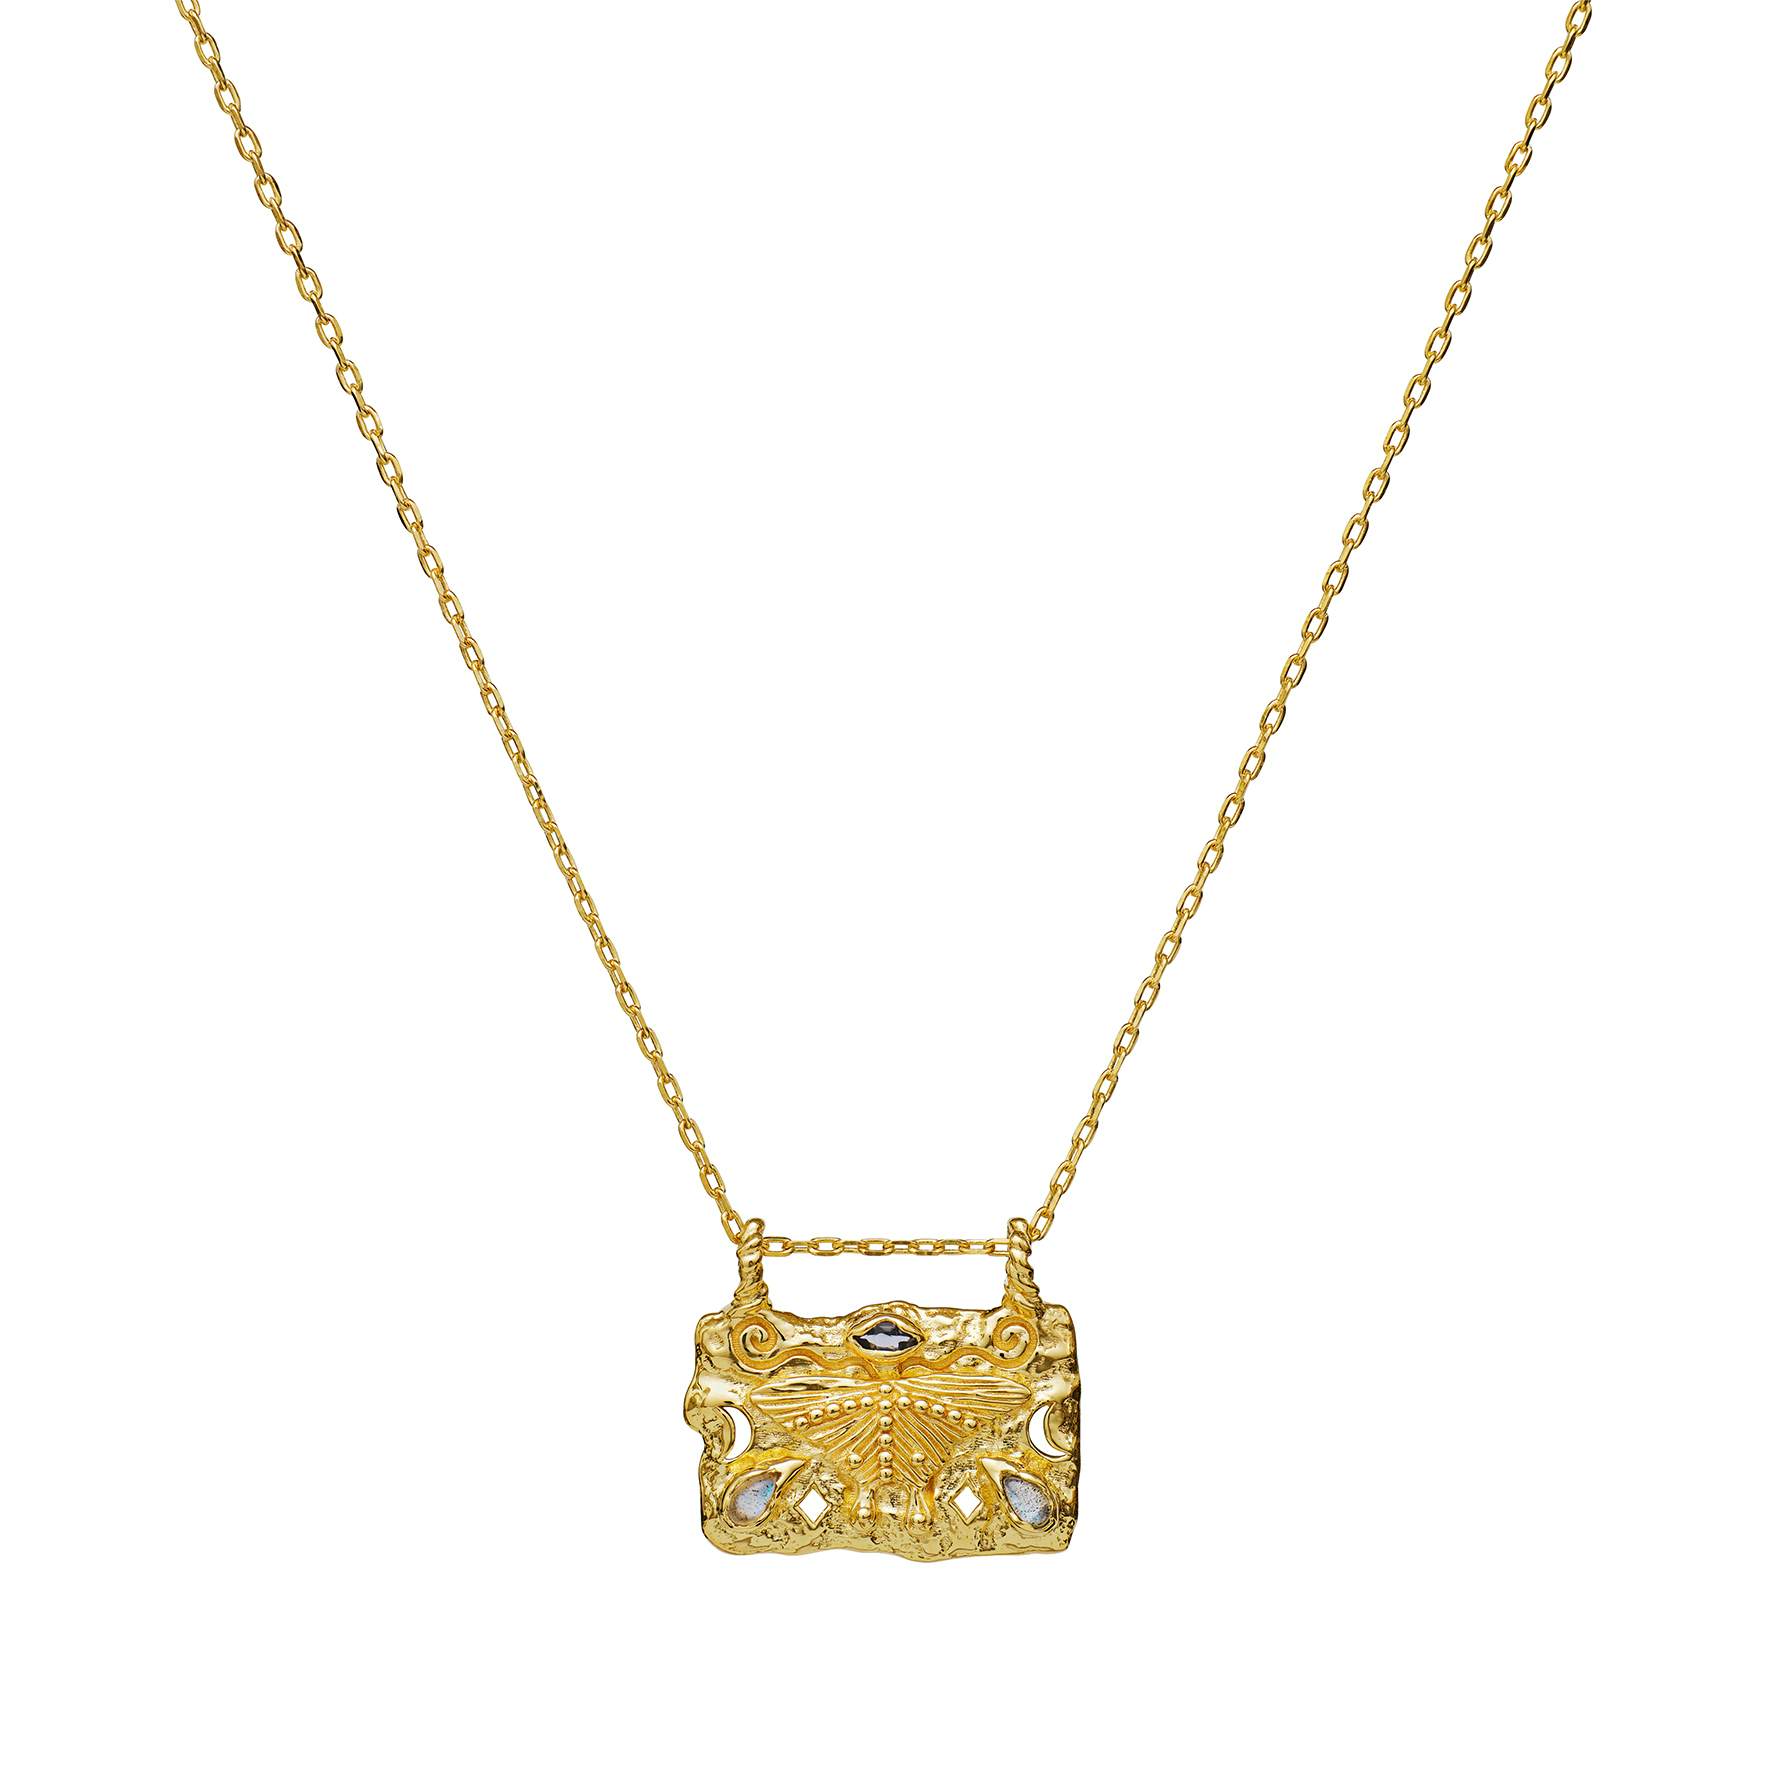 Avia Necklace from Maanesten in Goldplated-Silver Sterling 925